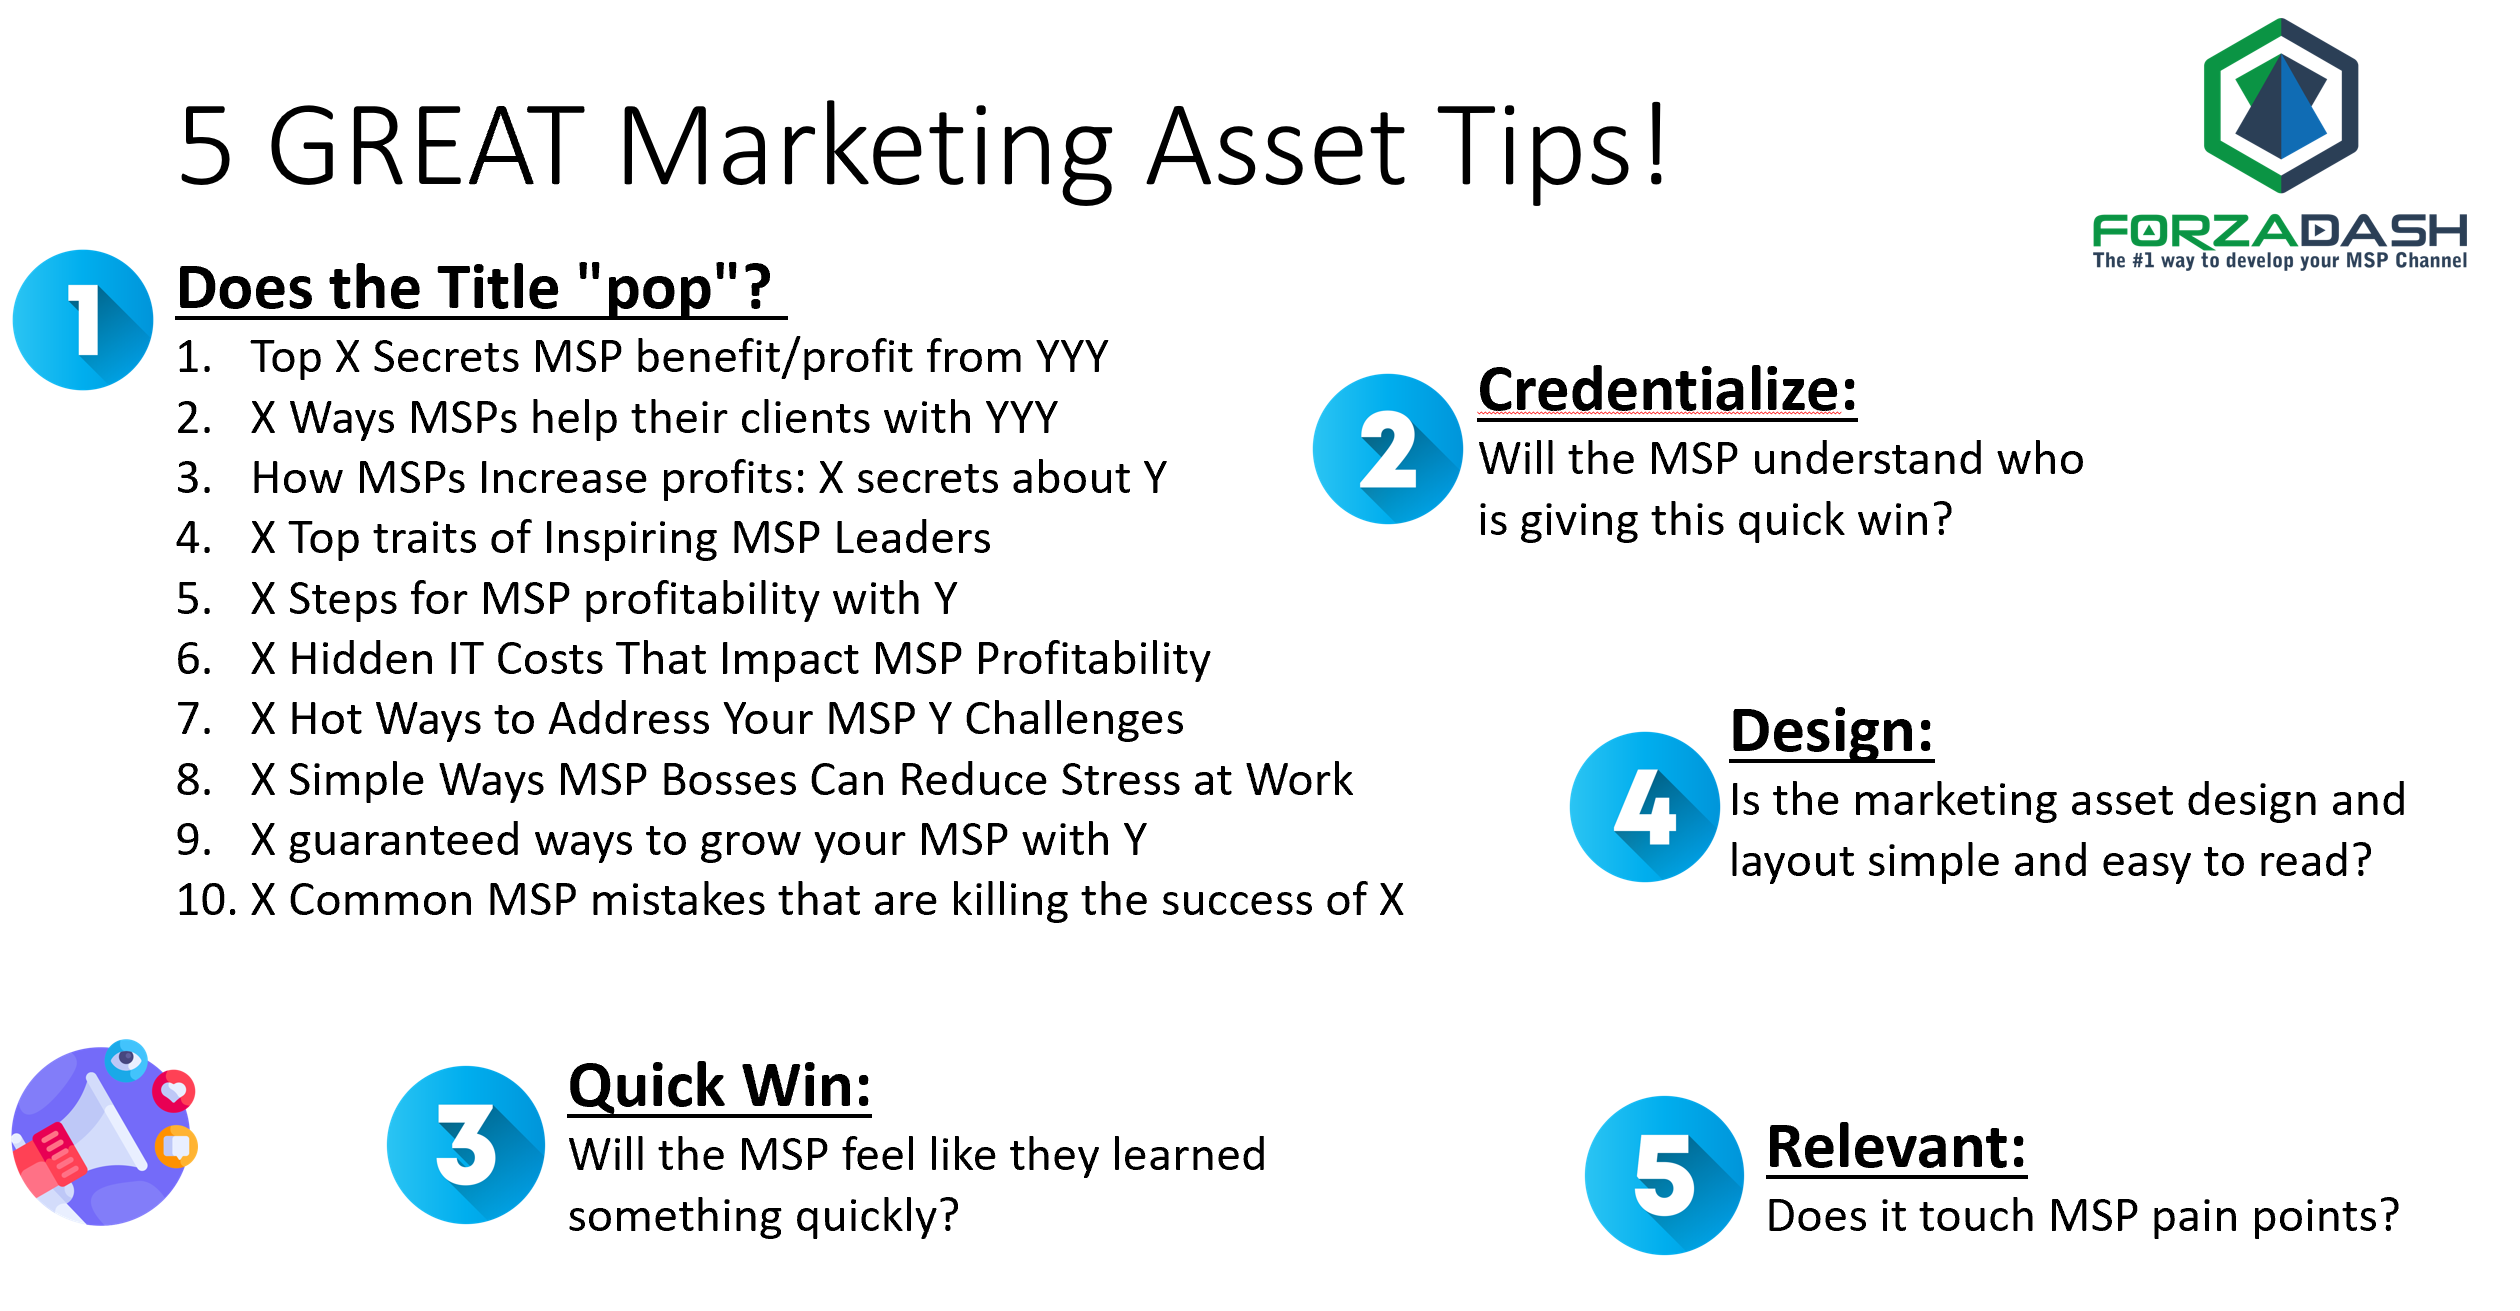 Marketing to MSPs: Top 5 Tips for Creating Great Assets for MSPs -  ForzaDash is the most effective way to develop a successful MSP channel